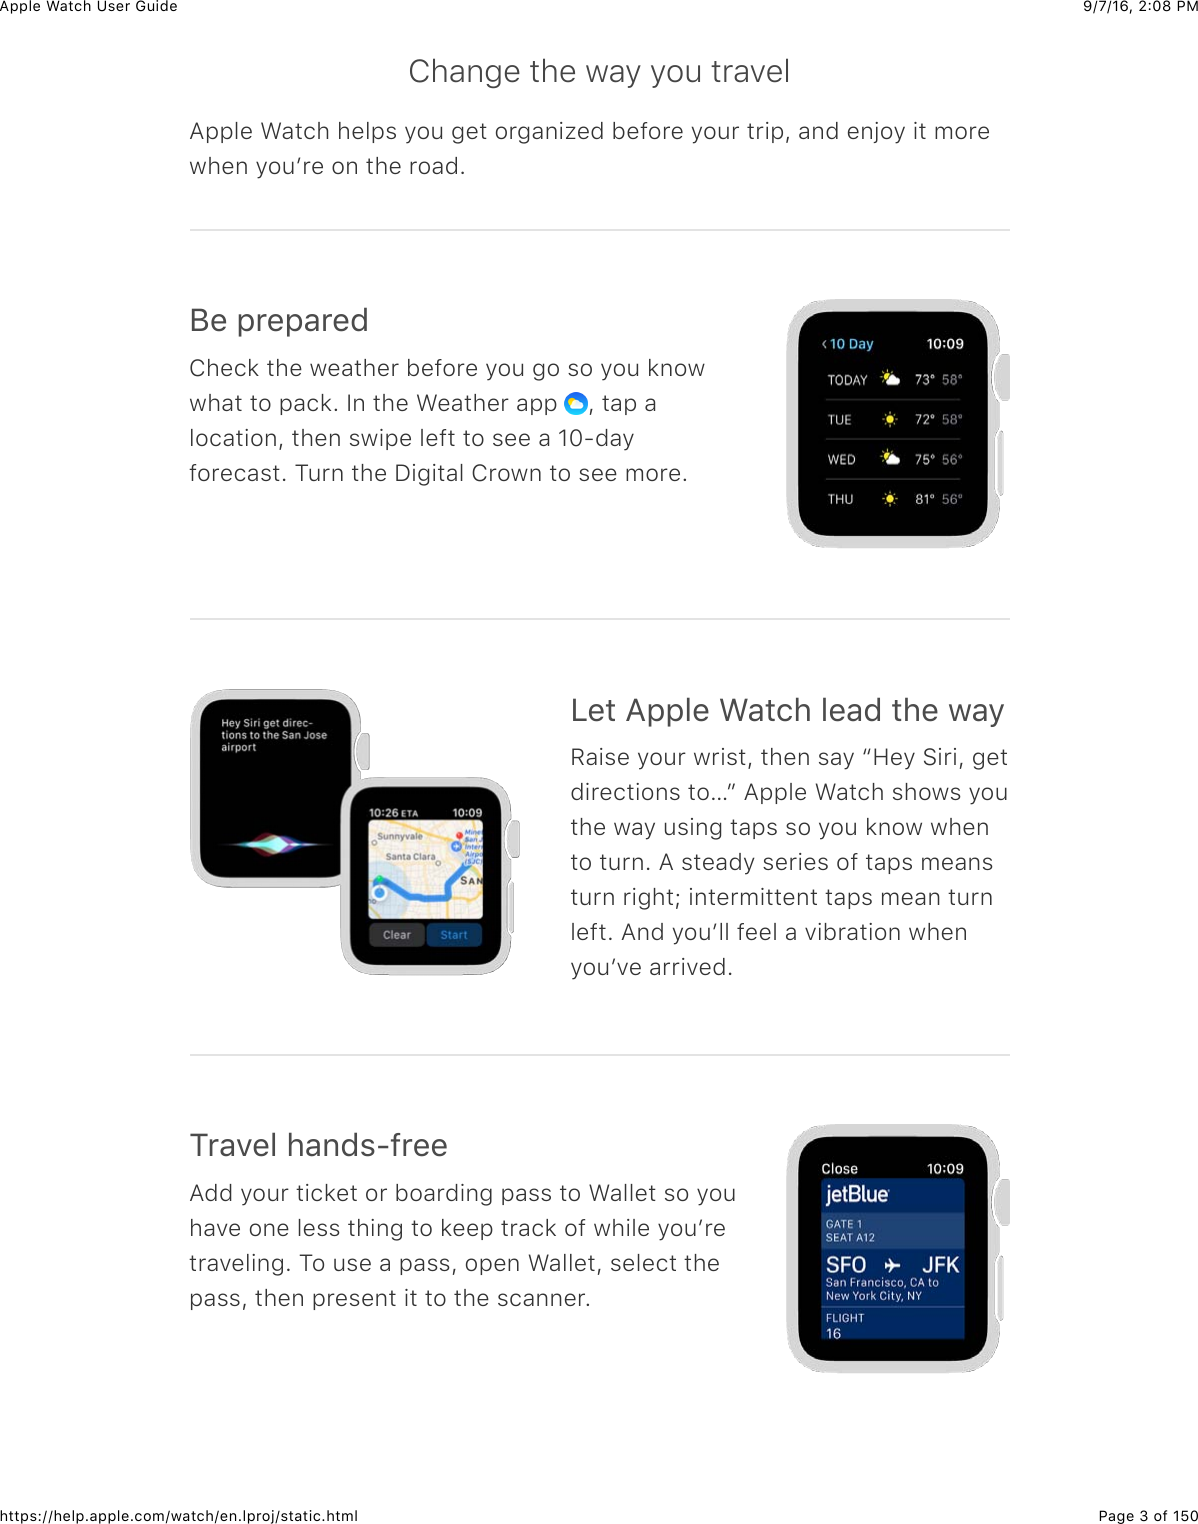 9/7/16, 2)08 PMApple Watch User GuidePage 3 of 150https://help.apple.com/watch/en.lproj/static.htmlChange the way you travelApple Watch helps you get organized before your trip, and enjoy it morewhen youʼre on the road.;%&amp;2*%2&apos;*%0Check the weather before you go so you knowwhat to pack. In the Weather app  , tap alocation, then swipe left to see a 10-dayforecast. Turn the Digital Crown to see more.&lt;%3&amp;=22&quot;%&amp;&gt;&apos;3()&amp;&quot;%&apos;0&amp;3)%&amp;7&apos;/Raise your wrist, then say “Hey Siri, getdirections to…” Apple Watch shows youthe way using taps so you know whento turn. A steady series of taps meansturn right; intermittent taps mean turnleft. And youʼll feel a vibration whenyouʼve arrived.1*&apos;.%&quot;&amp;)&apos;,0$?@*%%Add your ticket or boarding pass to Wallet so youhave one less thing to keep track of while youʼretraveling. To use a pass, open Wallet, select thepass, then present it to the scanner.